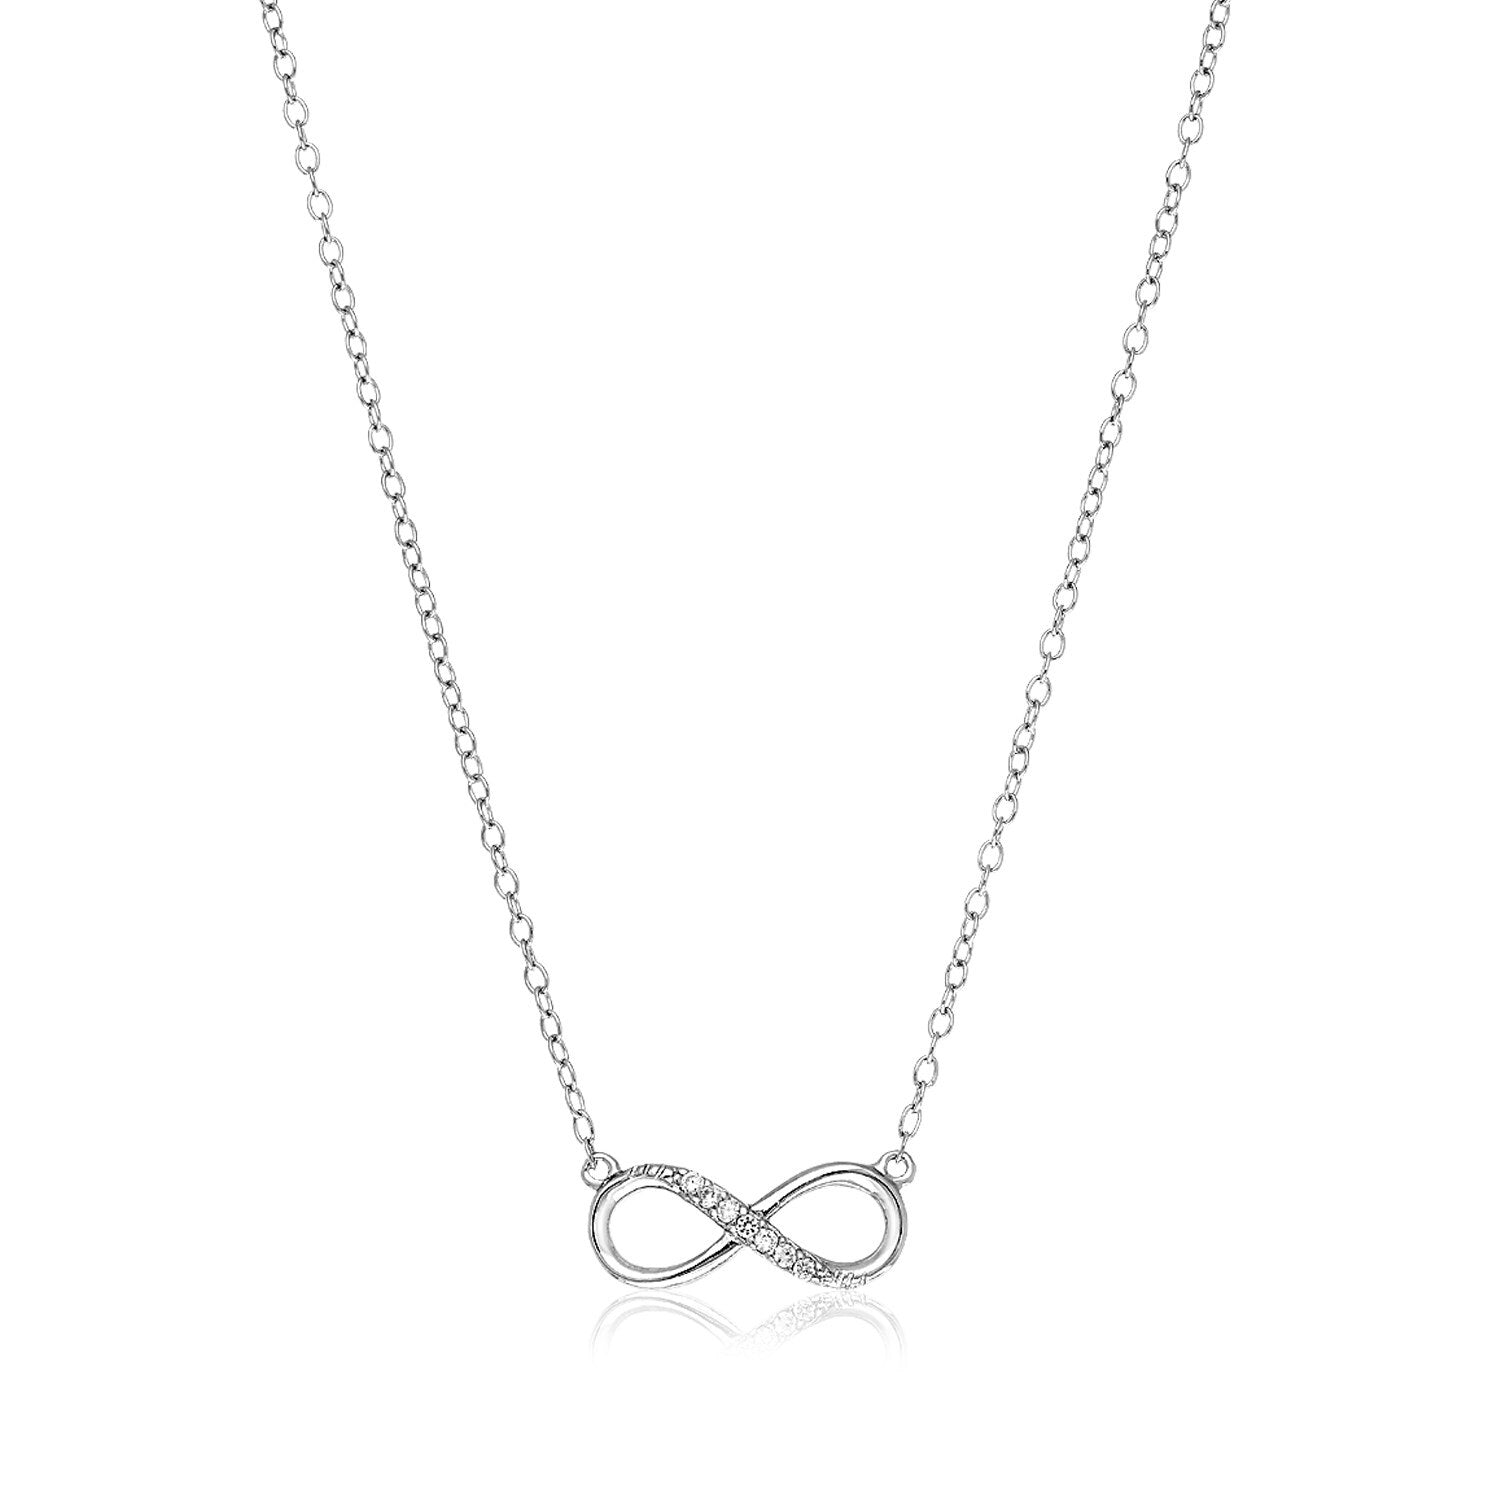 Size: 18'' - Sterling Silver Petite Infinity Symbol Necklace with Cubic Zirconias